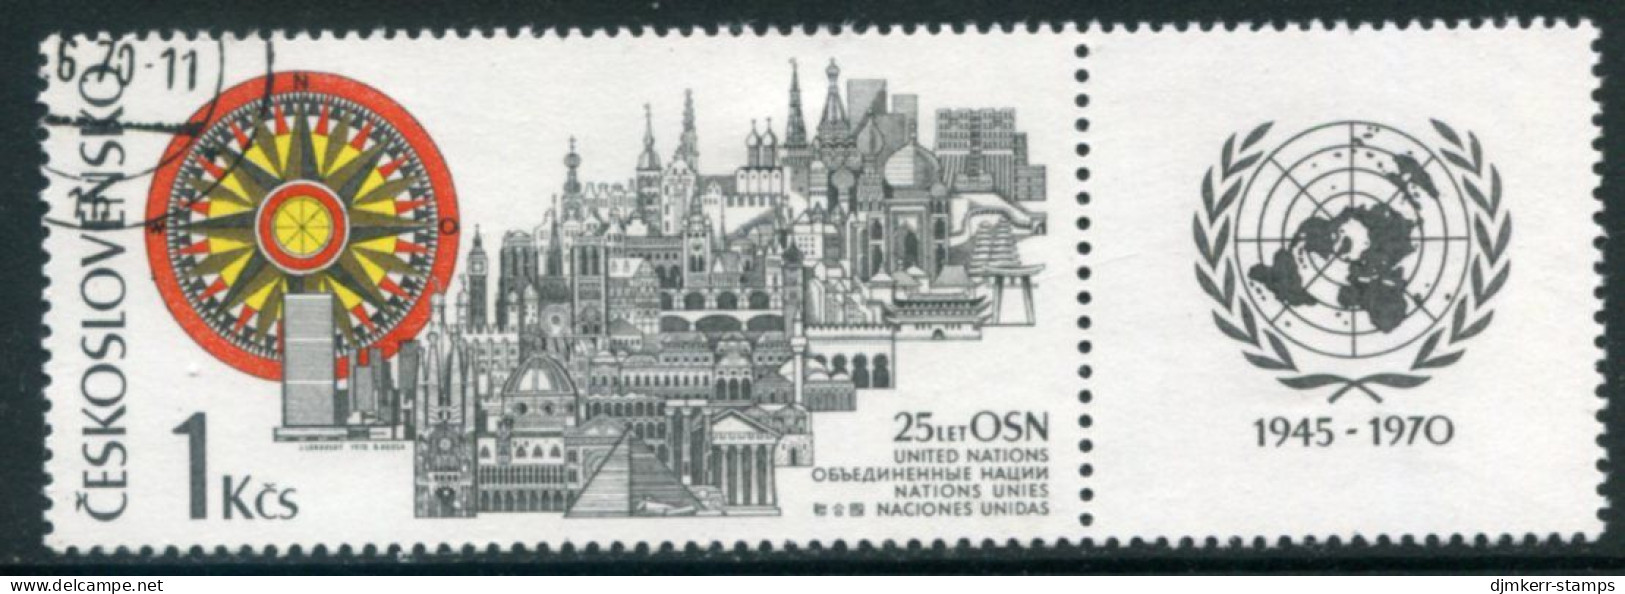 CZECHOSLOVAKIA 1970 UNO 25th Anniversary With Label Used Michel 1945 Zf - Usados